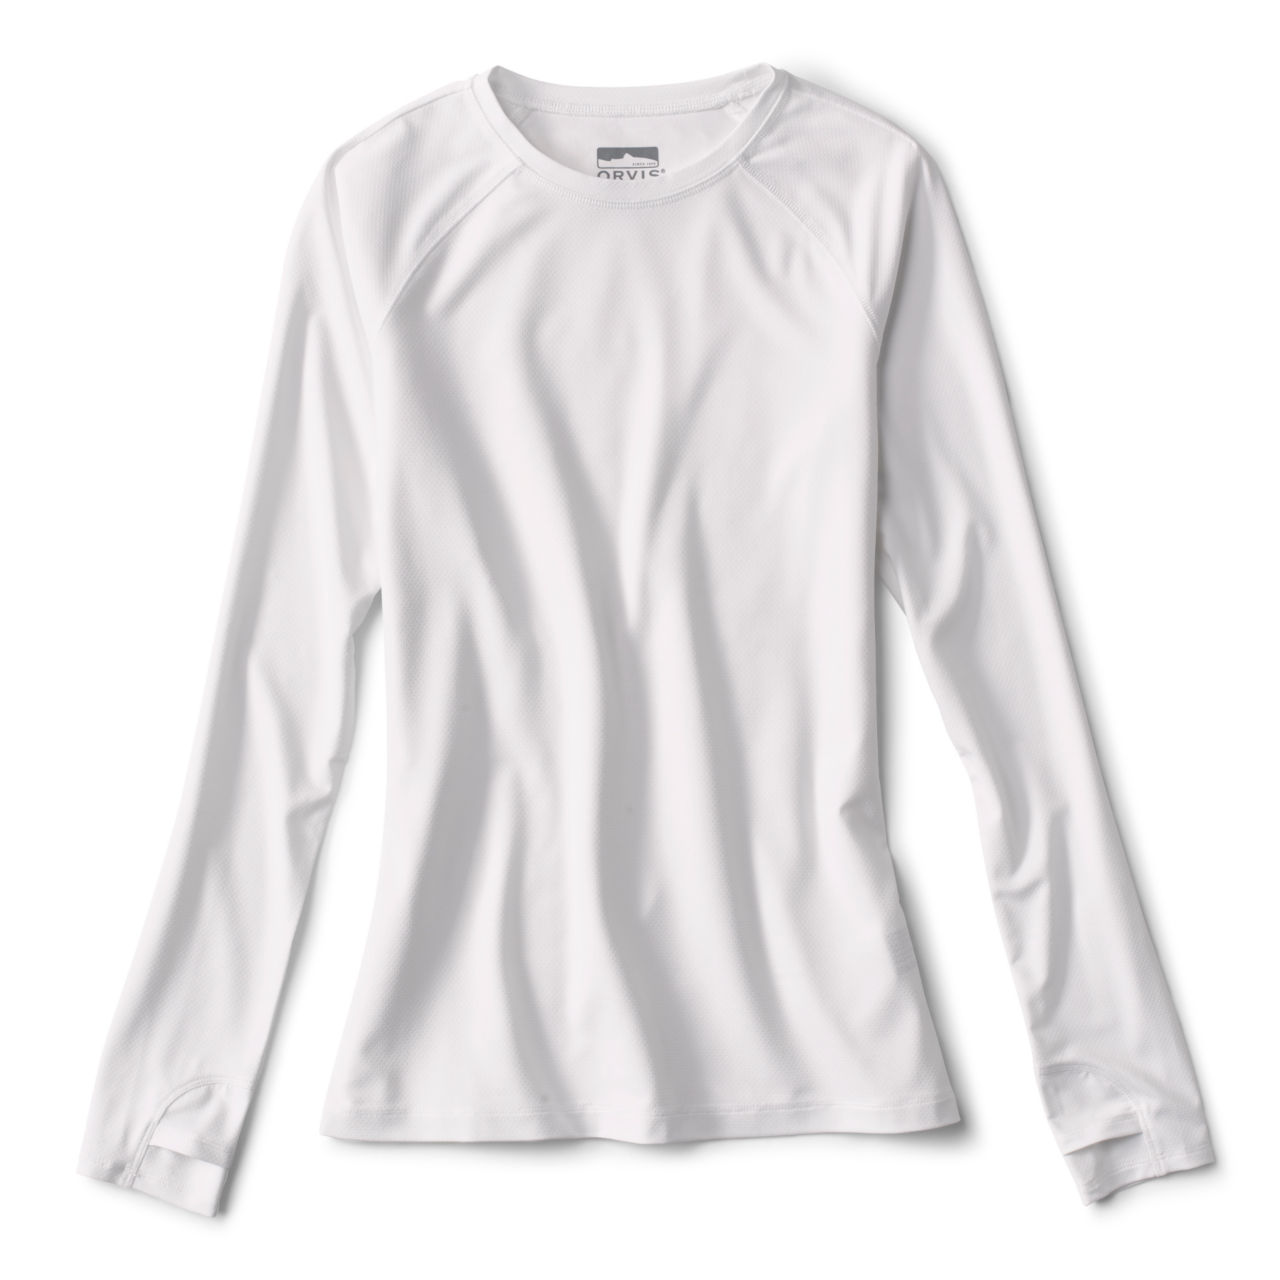 Motion Long-Sleeved Tee - WHITE image number 0